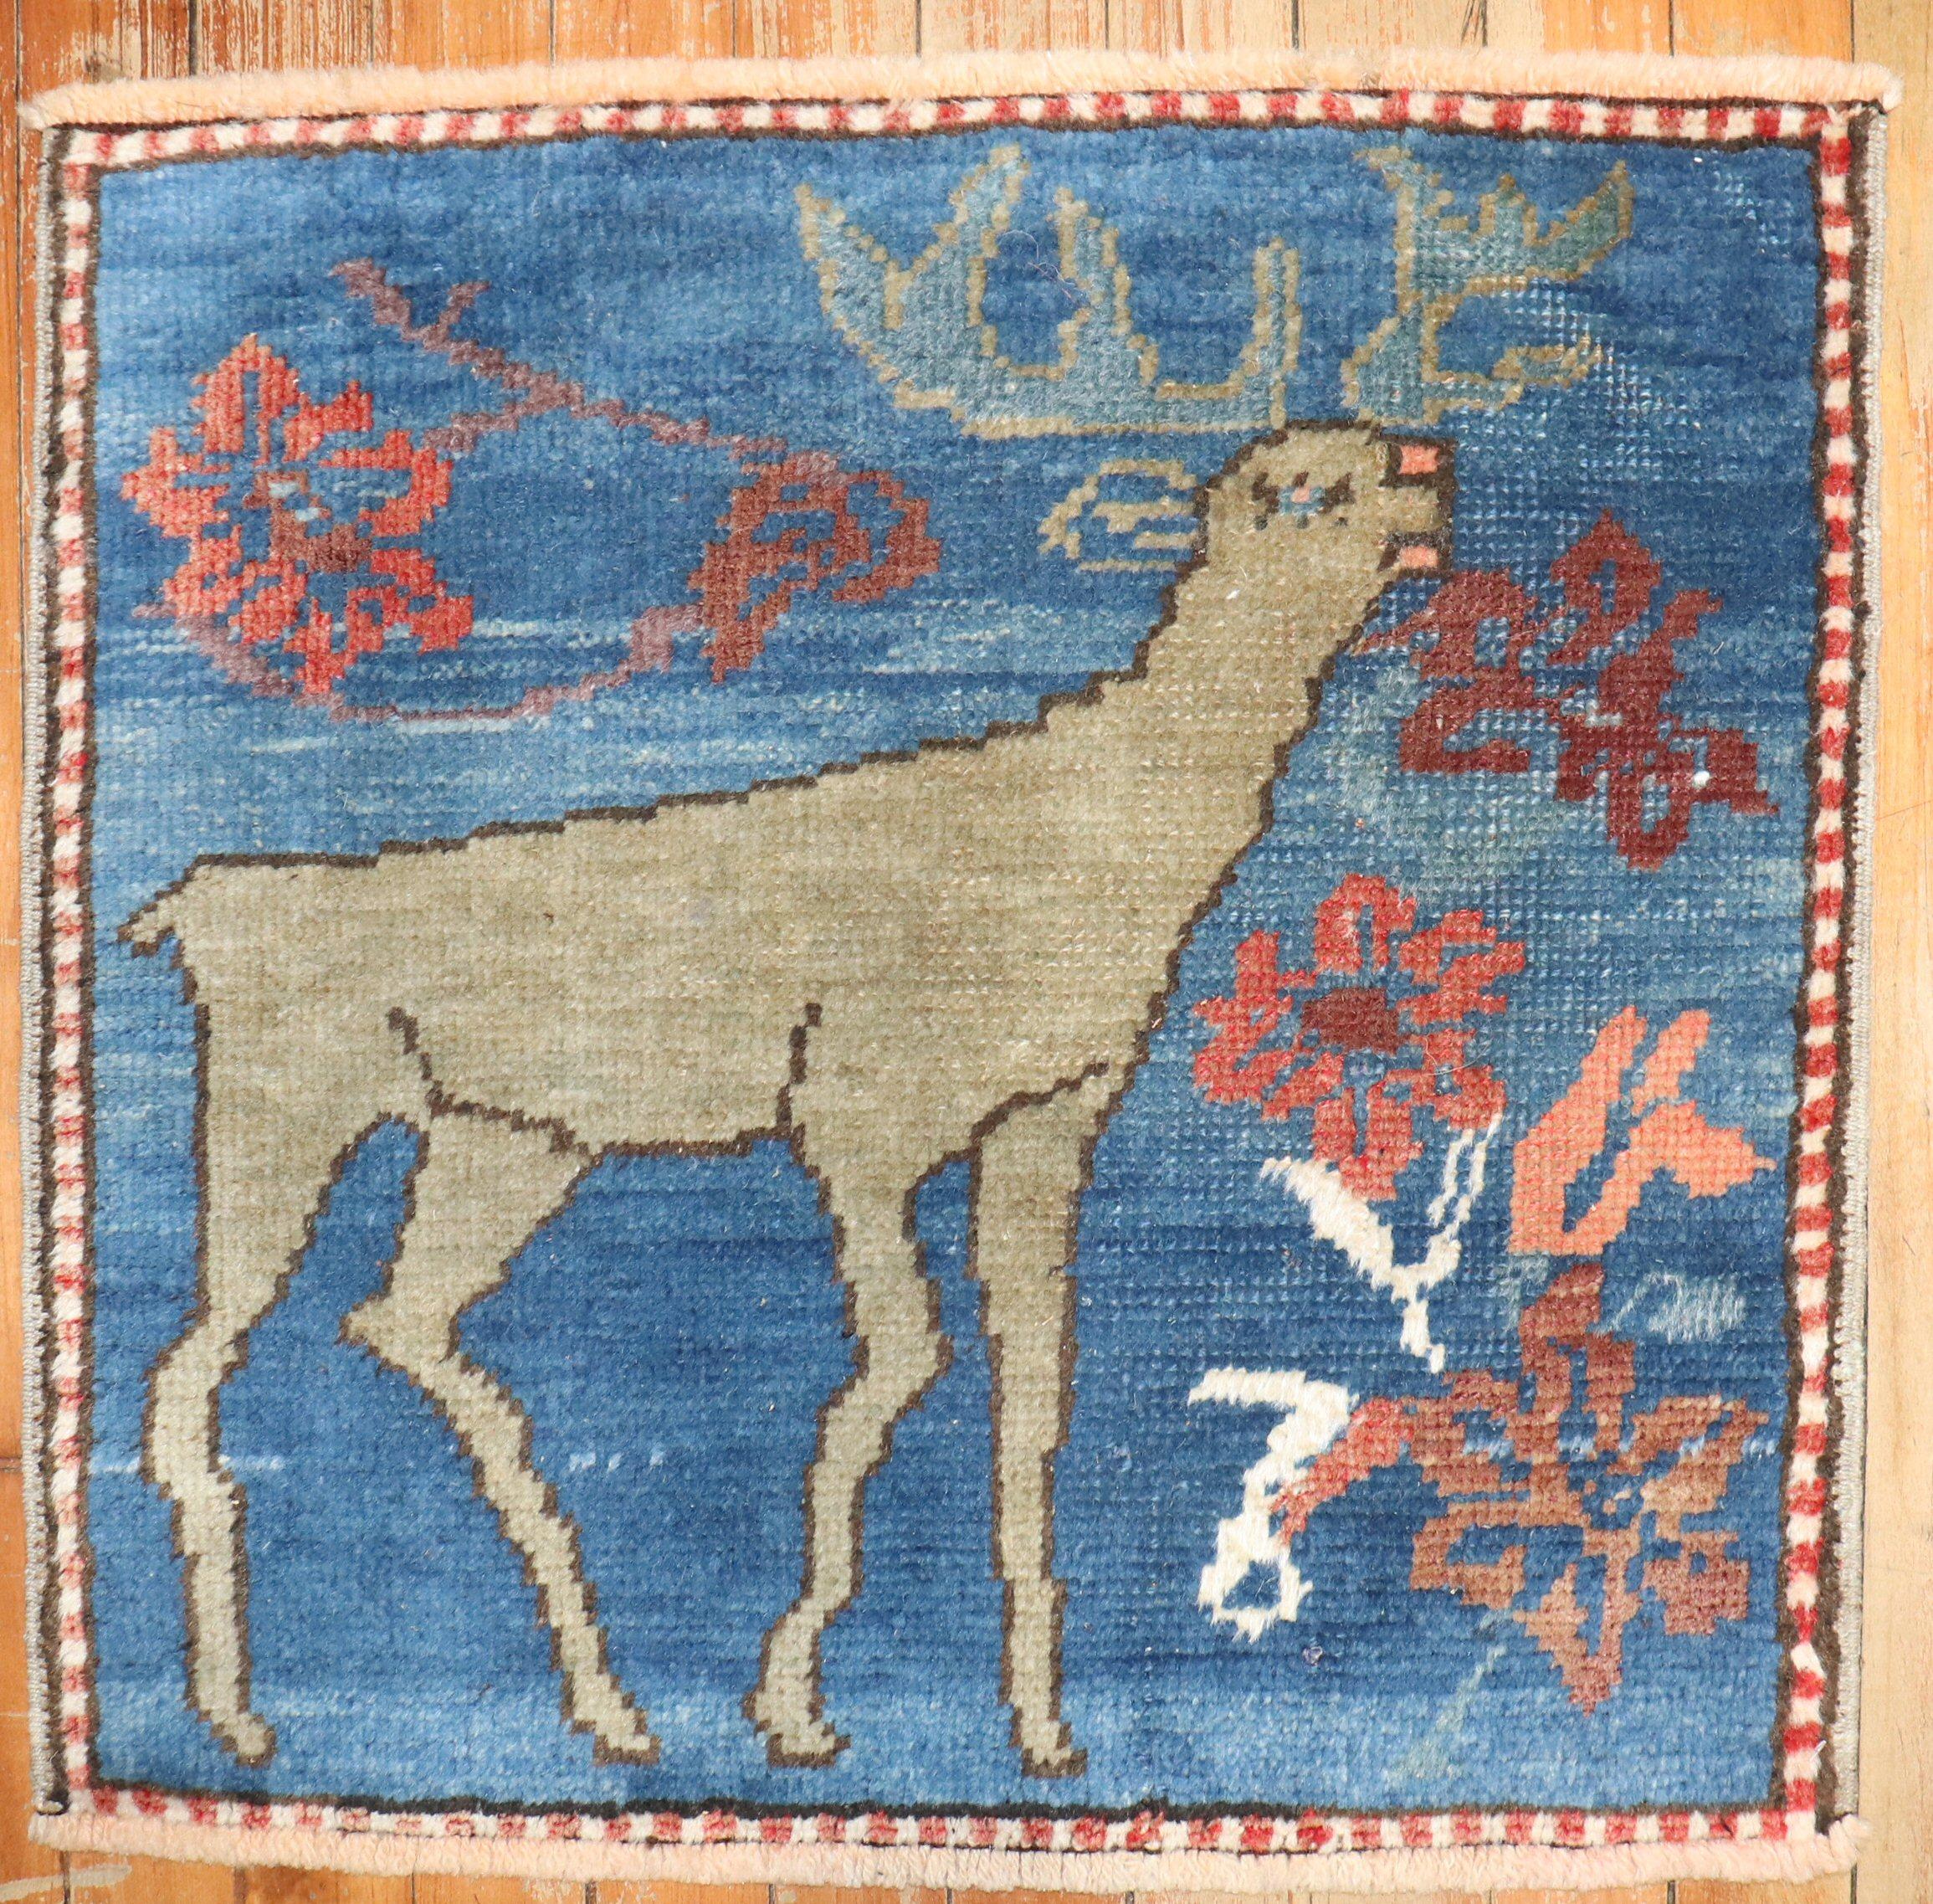 mid 20th century Turkish Rug with a reindeer on a blue field with flowers hovering around

Details
rug no.	j3837
size	1' 9